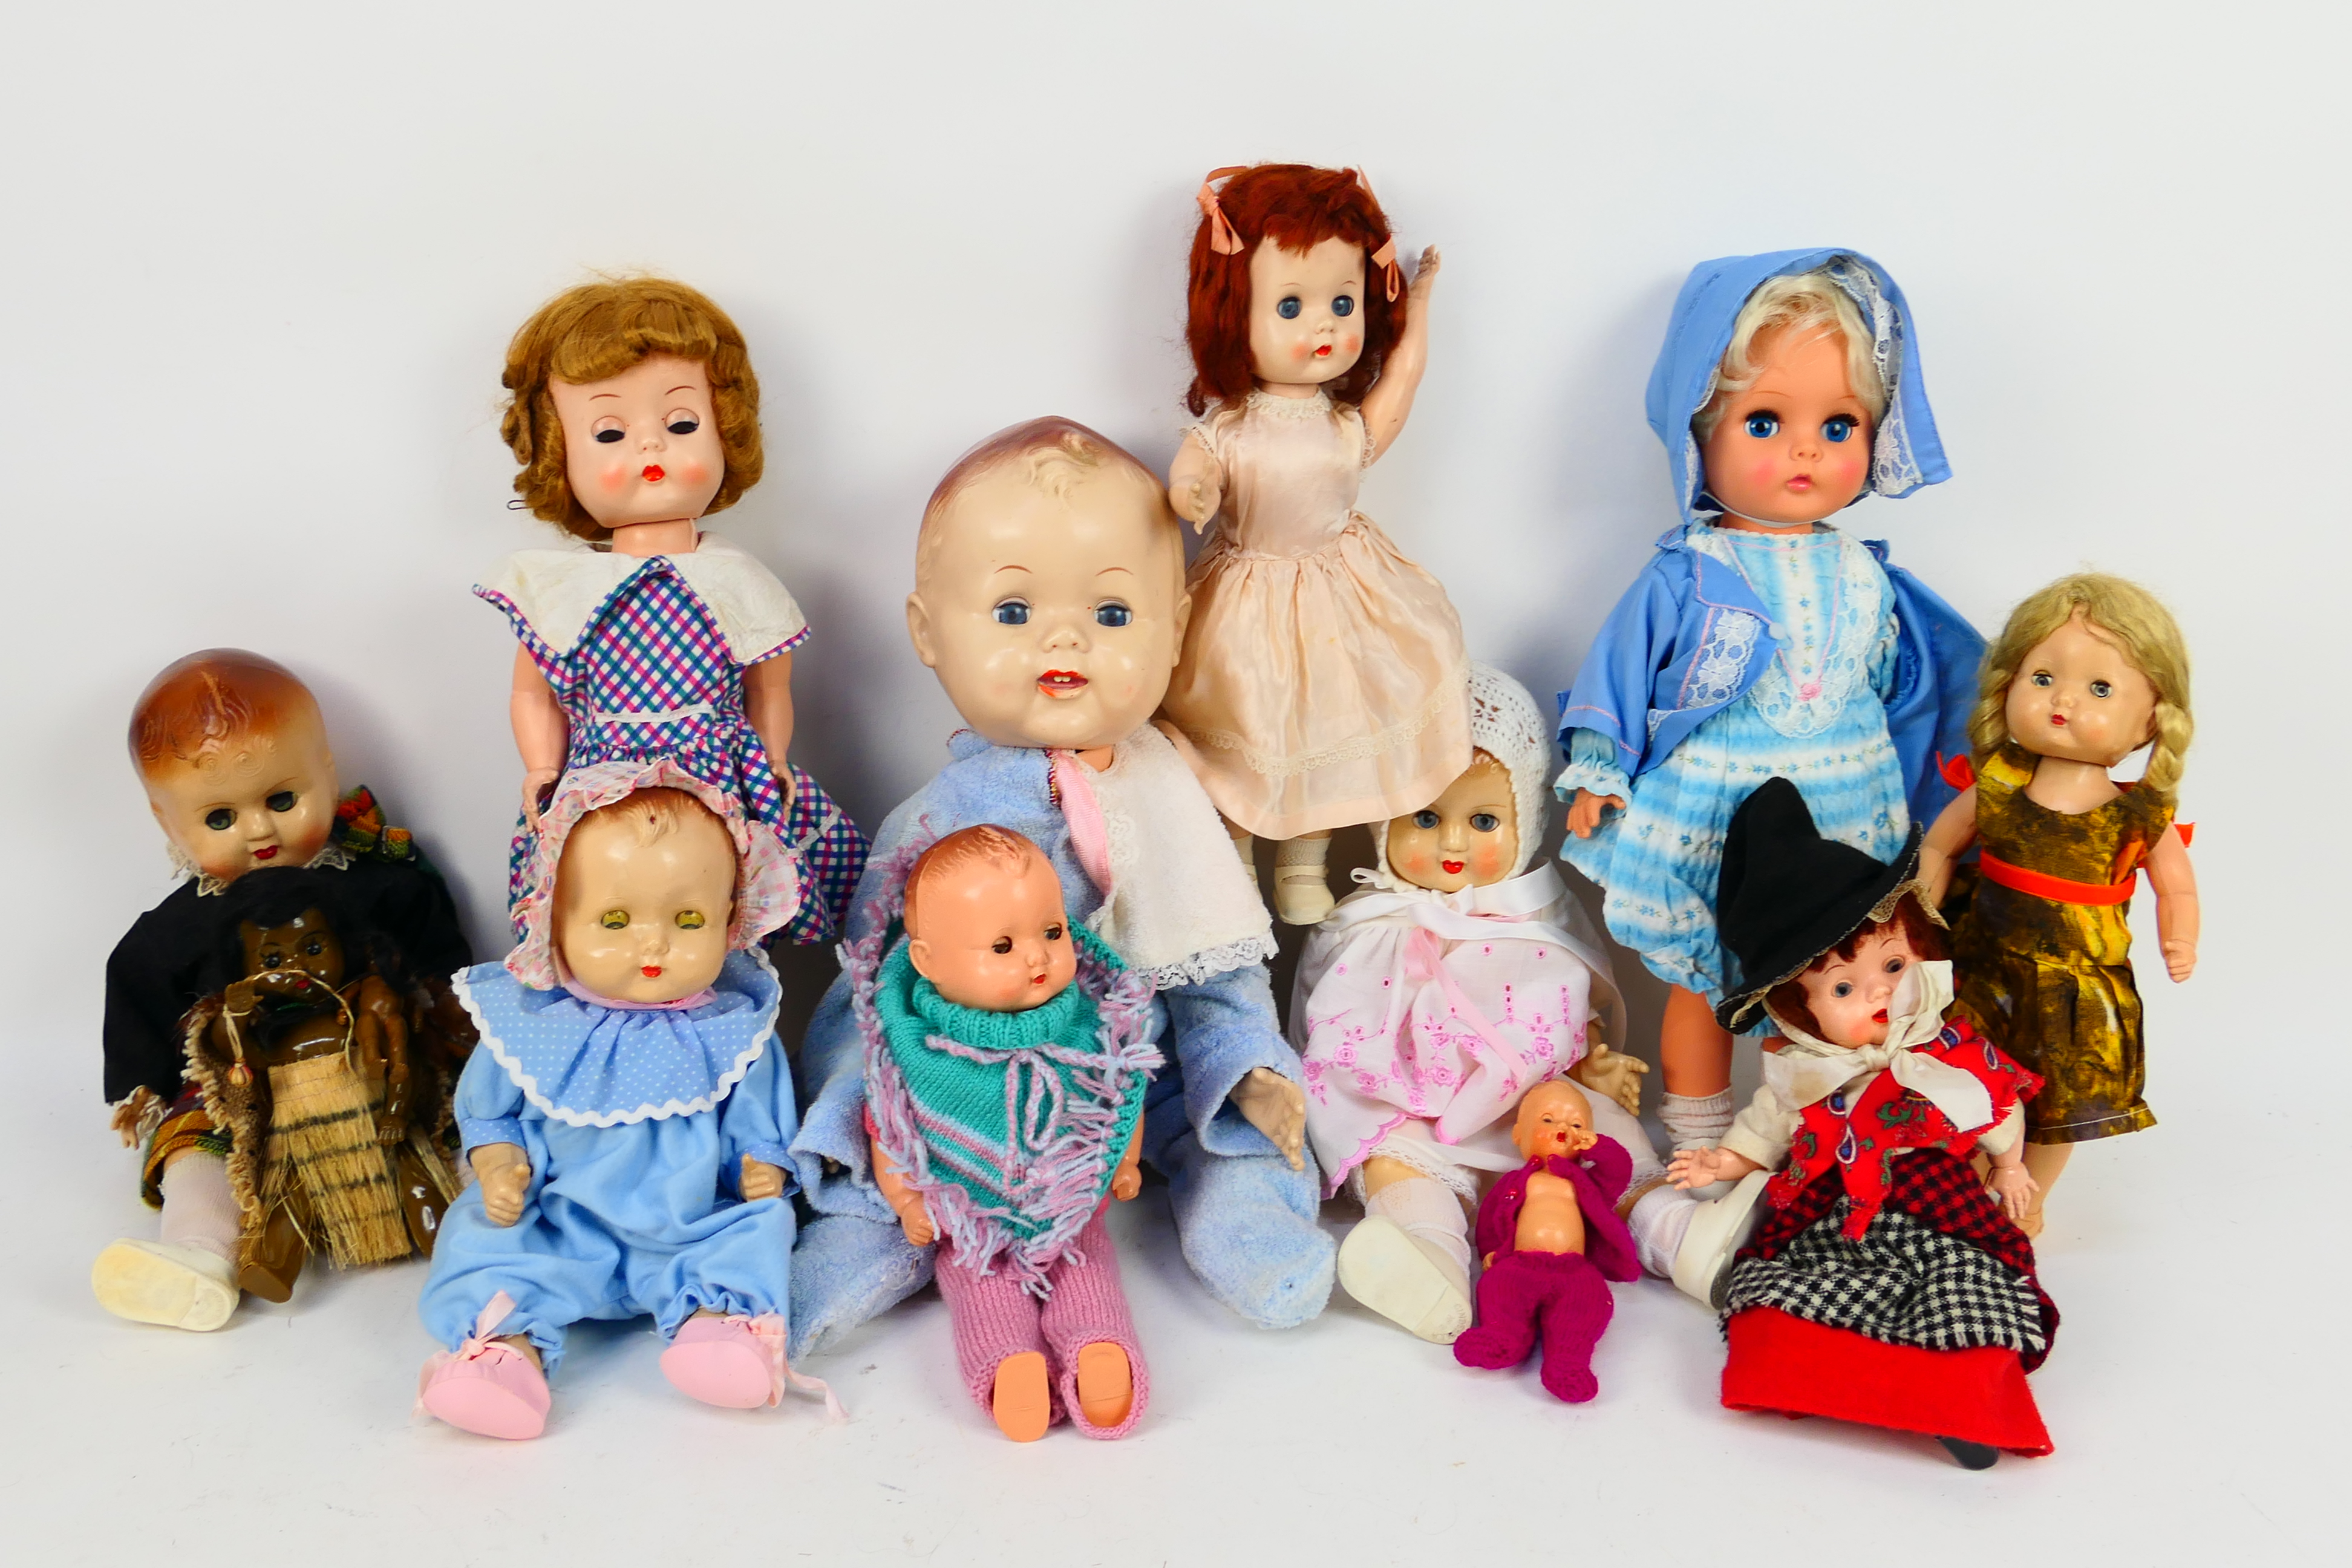 Roddy Dolls - An unboxed group of vintage Roddy dolls in various sizes,